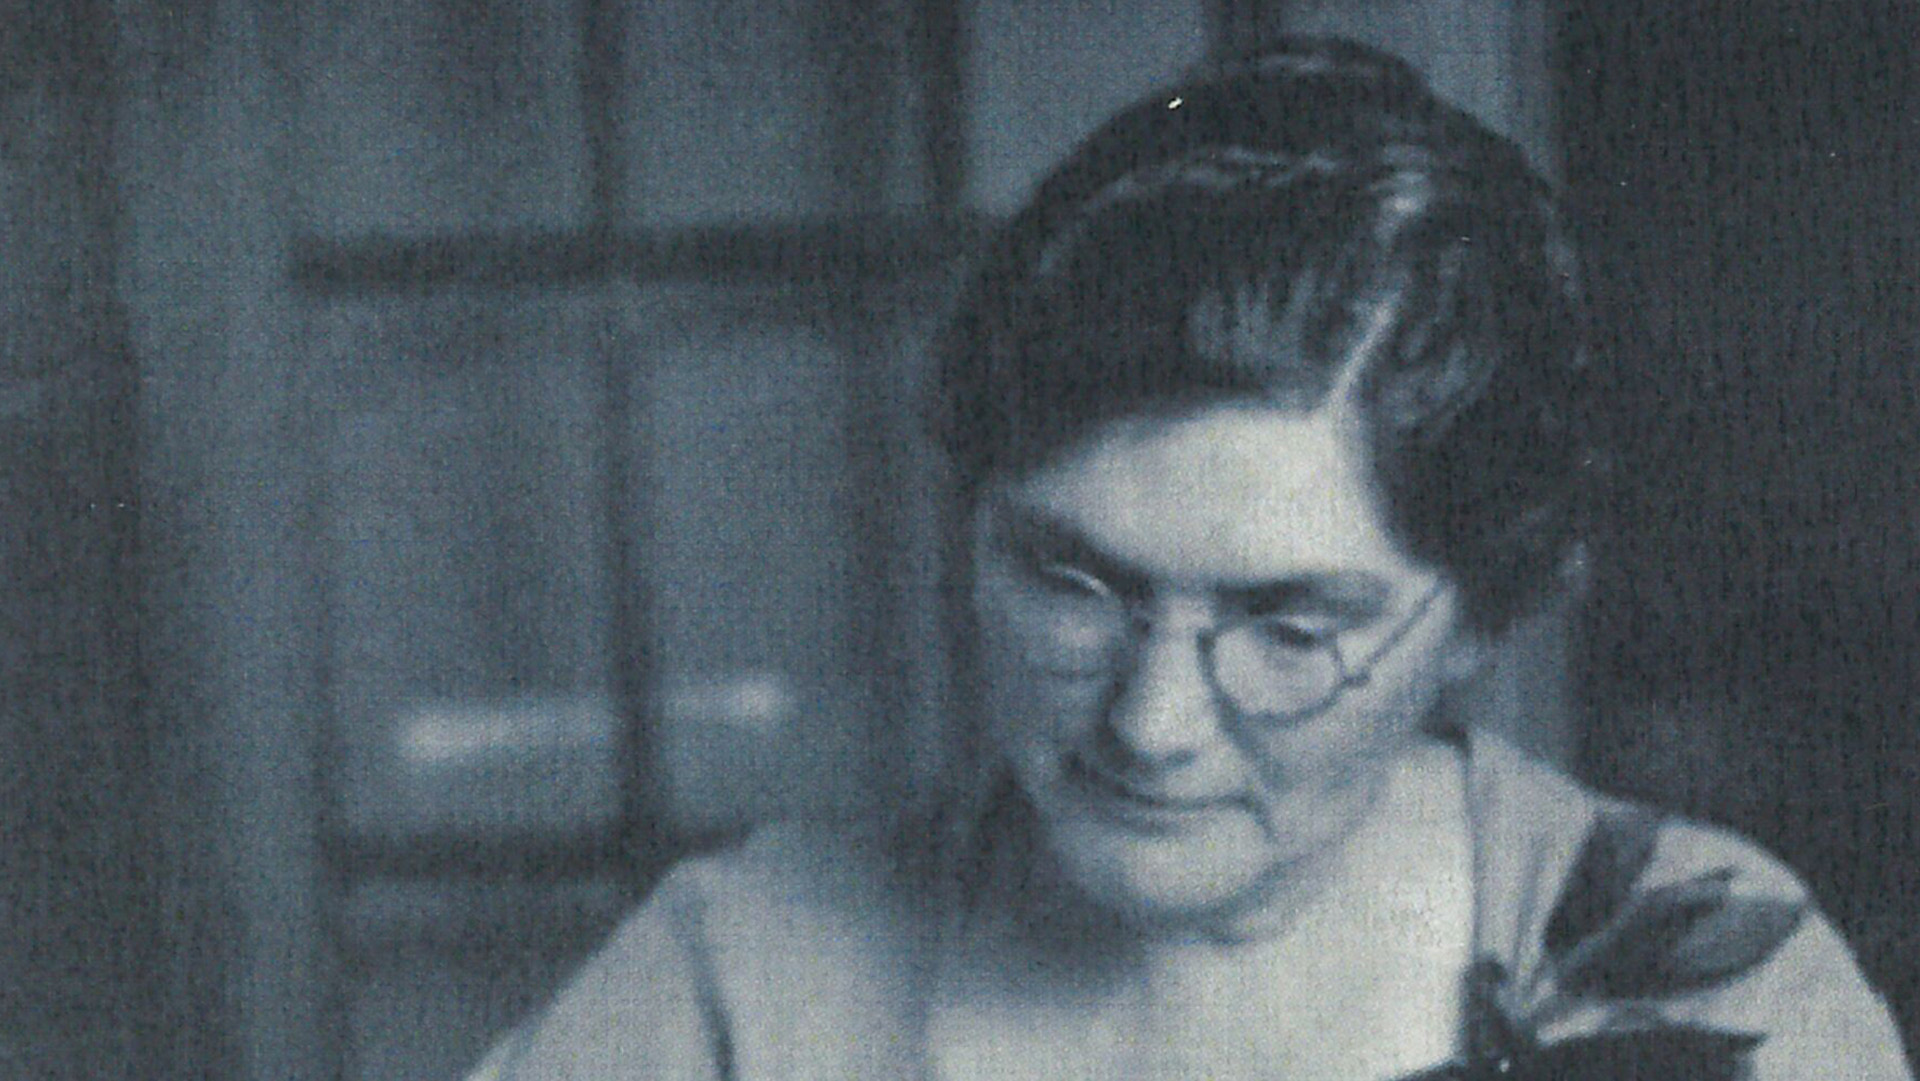 A vintage black and white photo of Ethel Harpst, a woman with glasses, looking downward in a reflective pose.